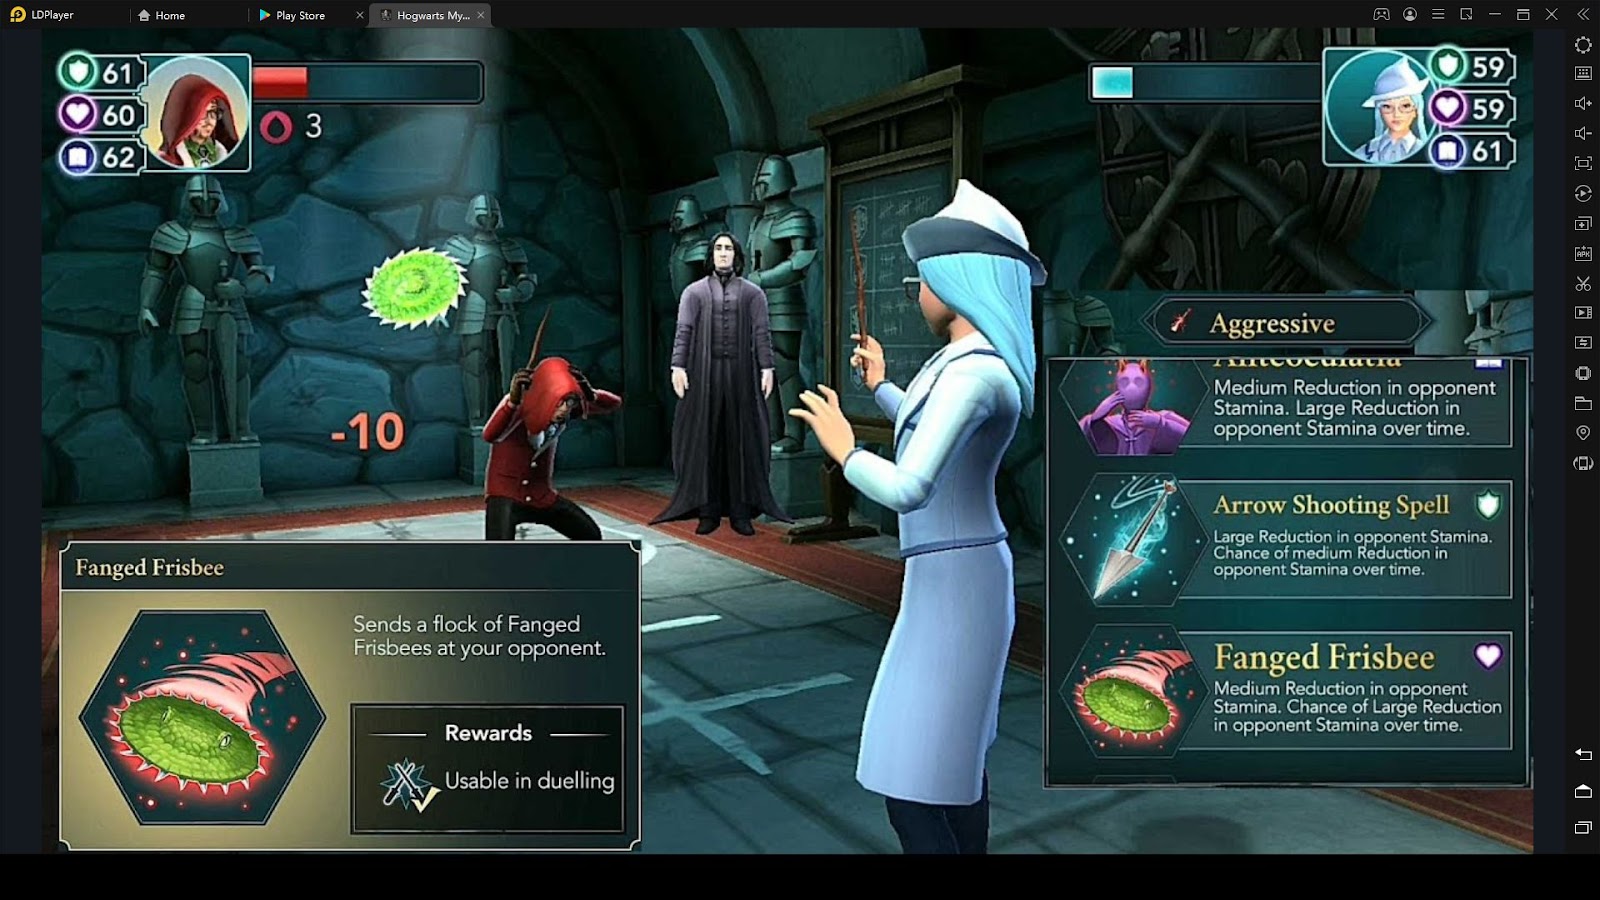 Harry Potter: Hogwarts Mystery tips and tricks: Get free energy